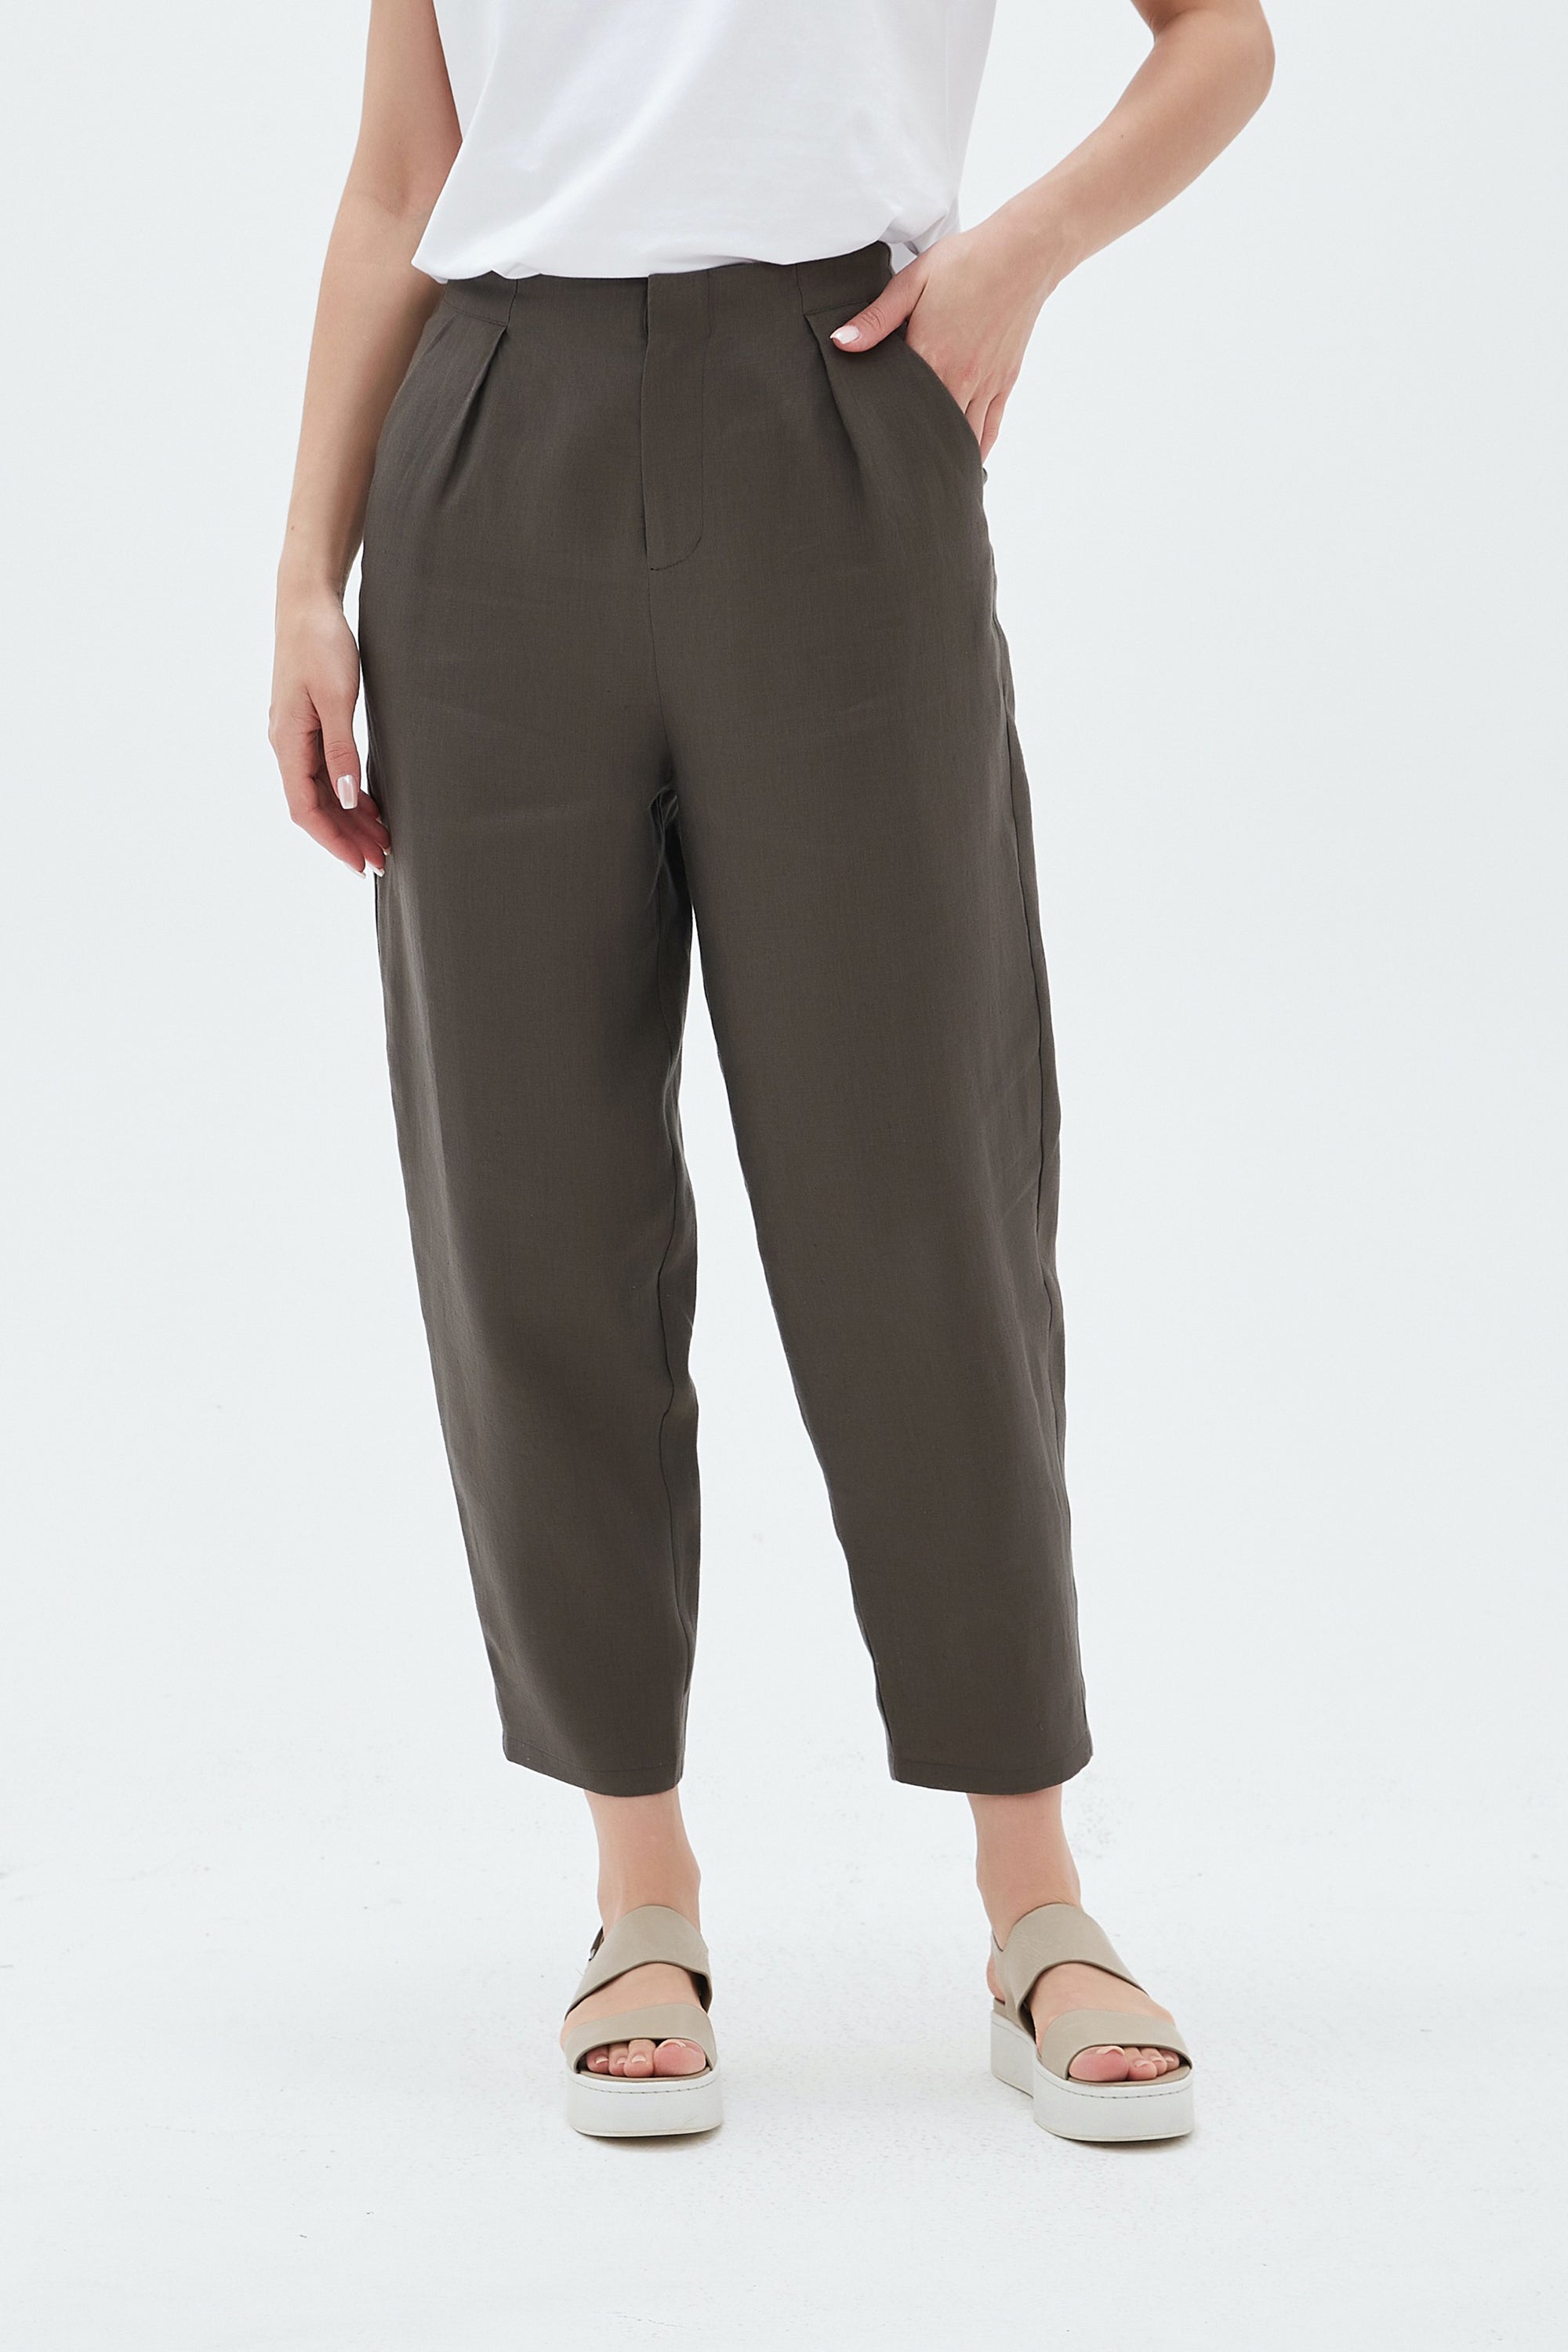 Cotton Rich Slim Fit Cropped Trousers | Seasalt Cornwall | M&S